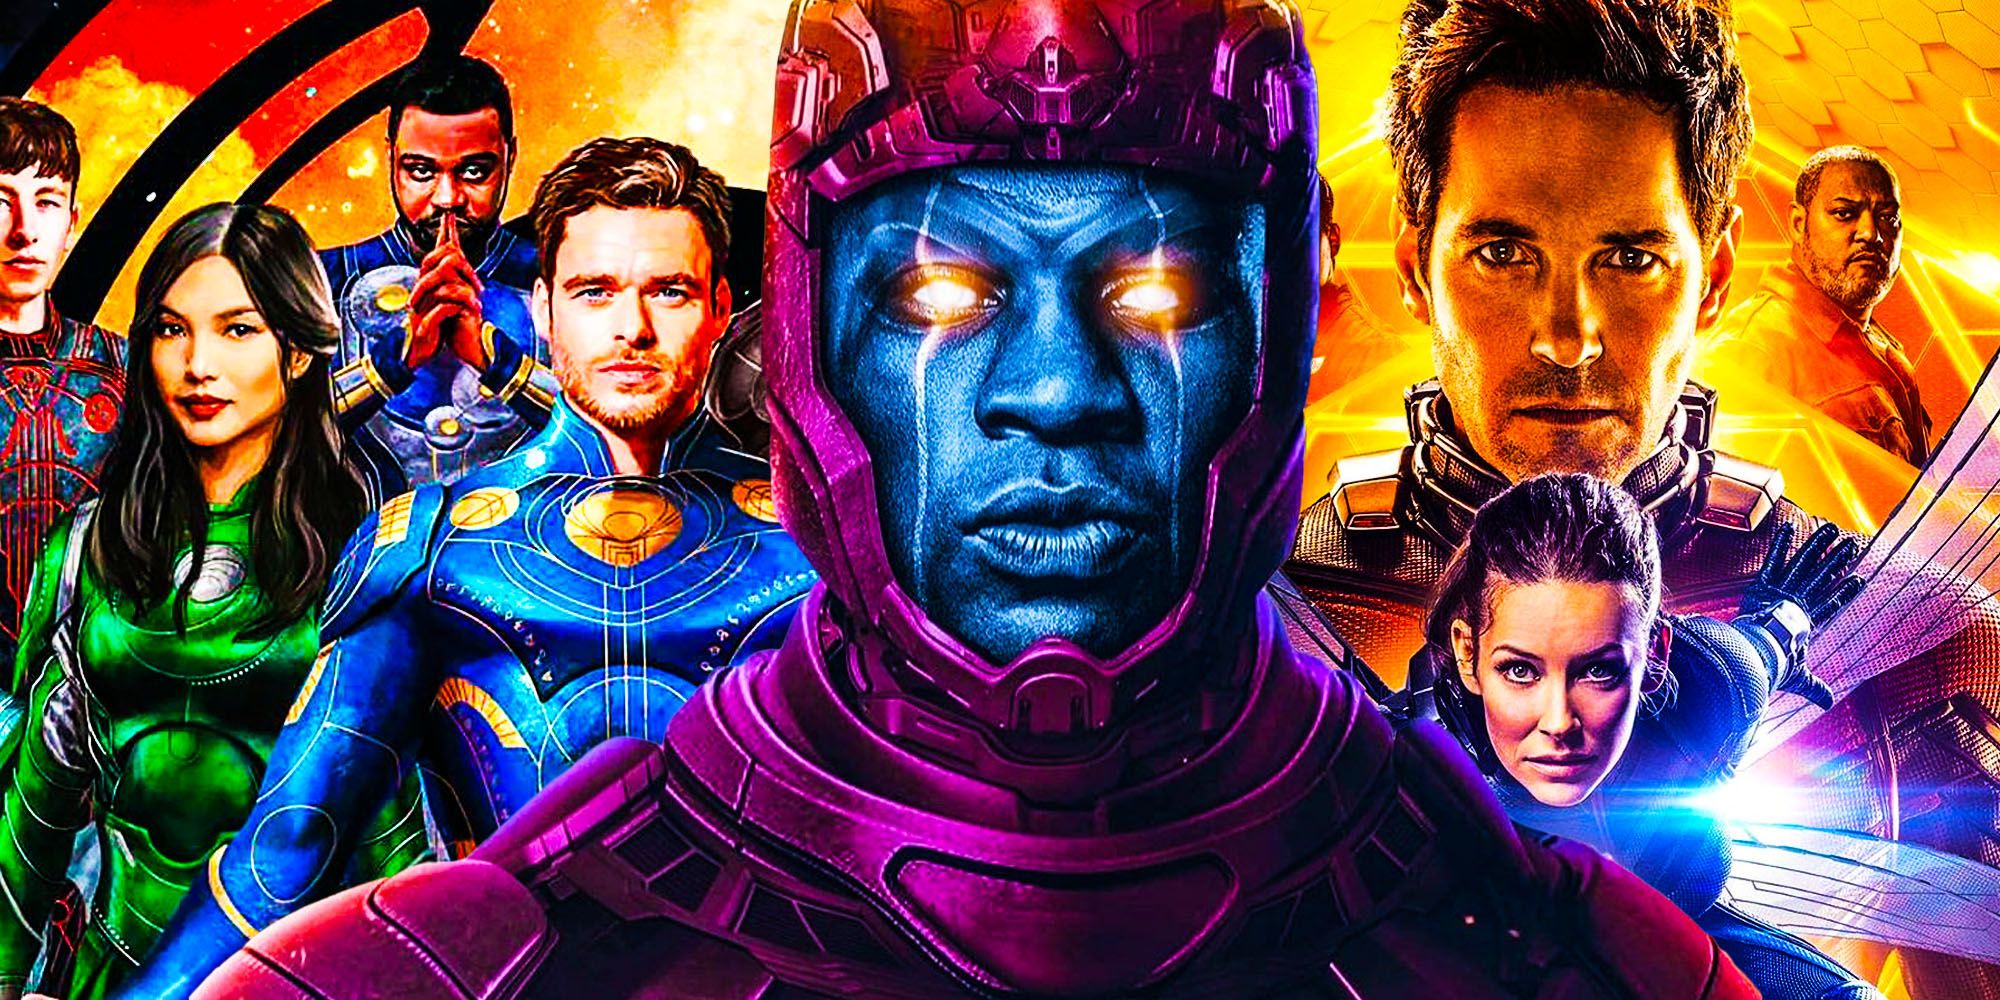 Kang will appear next in The Eternals before Antman and the wasp